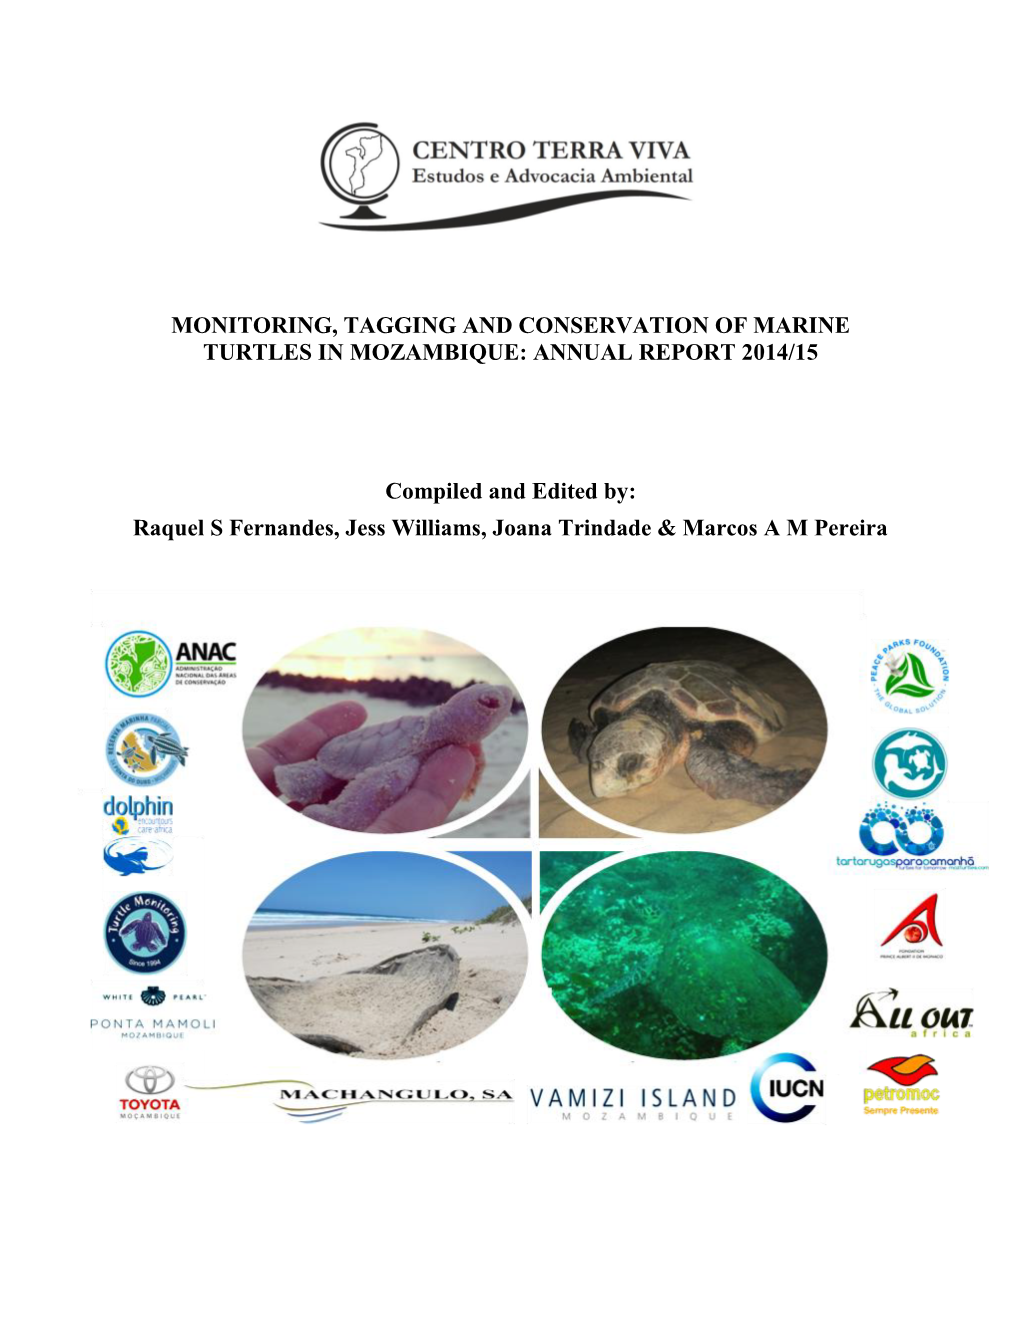 Monitoring, Tagging and Conservation of Marine Turtles in Mozambique: Annual Report 2014/15